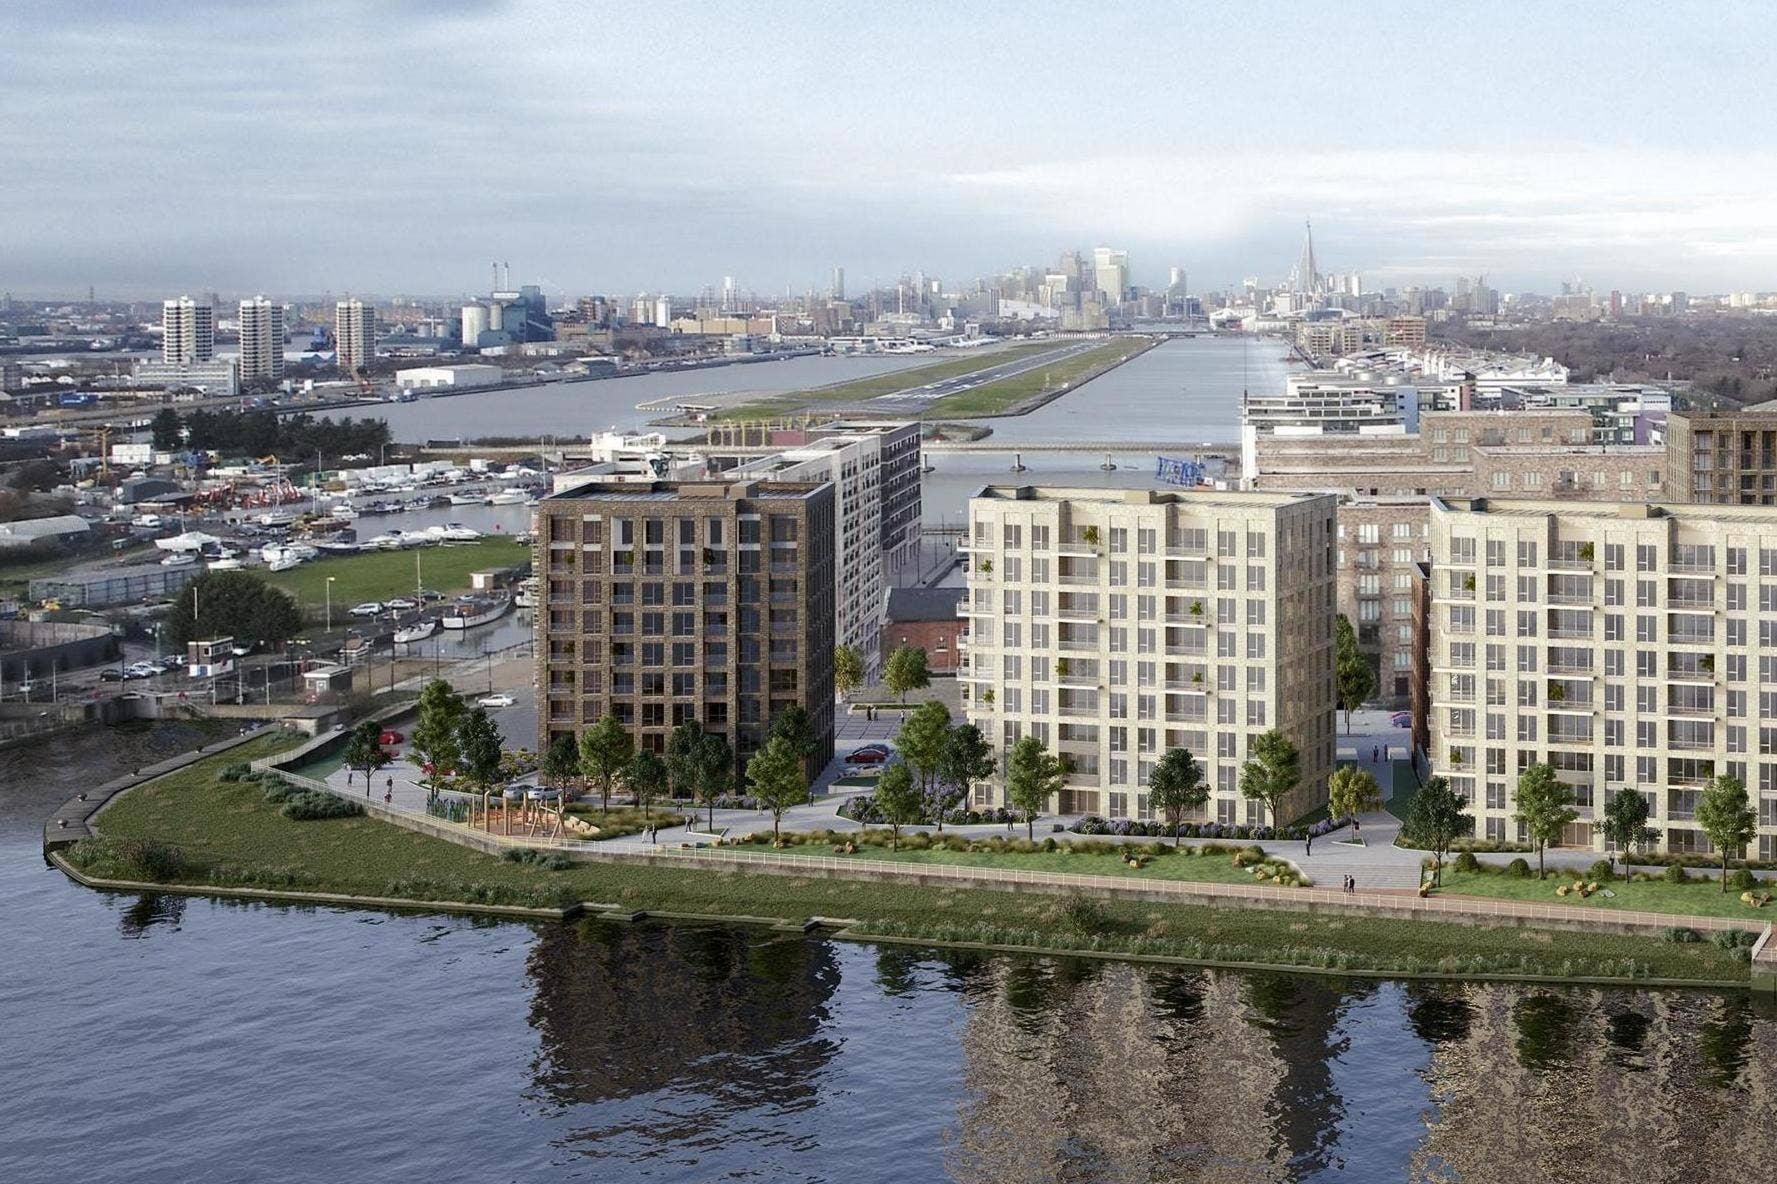 London's second city centre, rising out of the Royal Docks, is set to become the heartland of the new East End within a decade